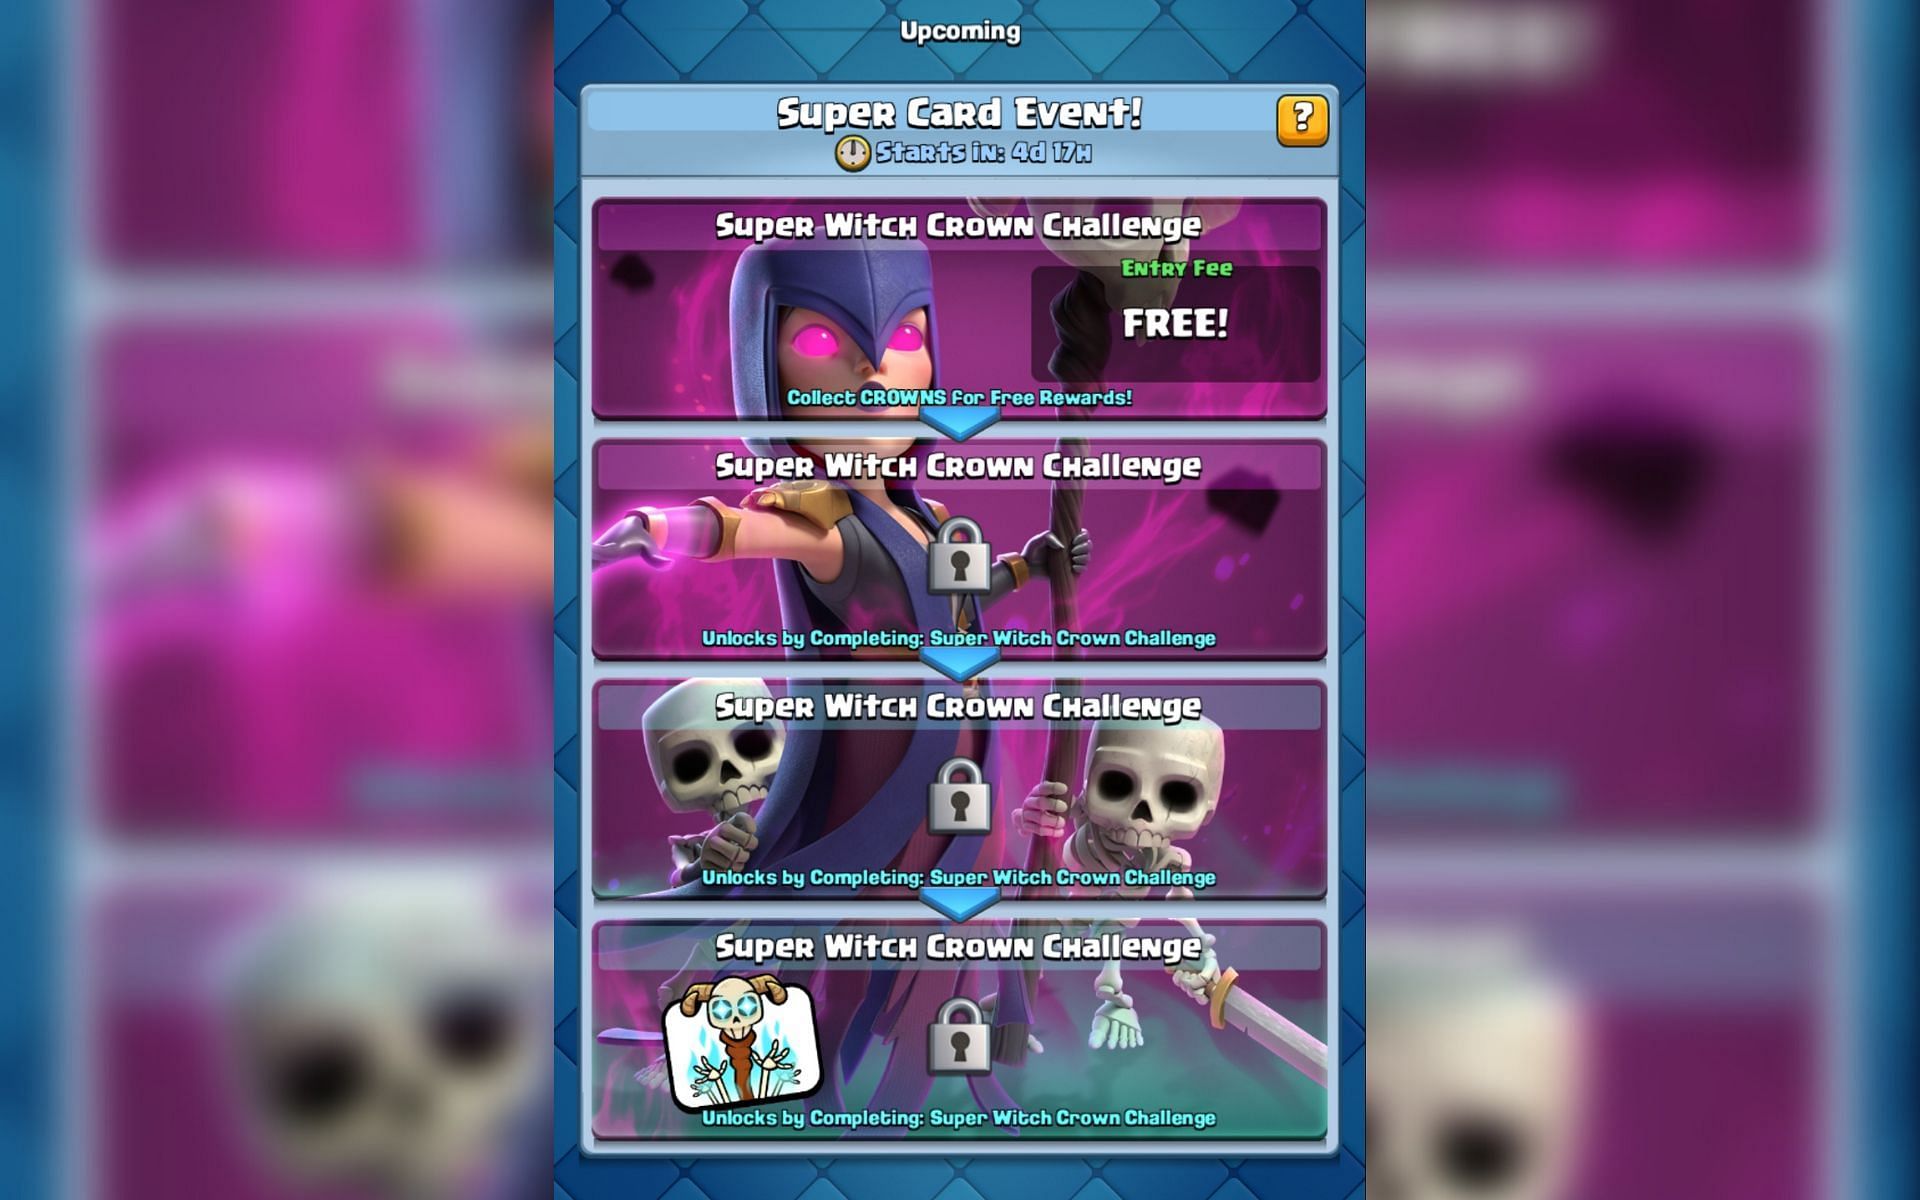 The Super Witch Crown challenge in-game (Image via Sportskeeda)